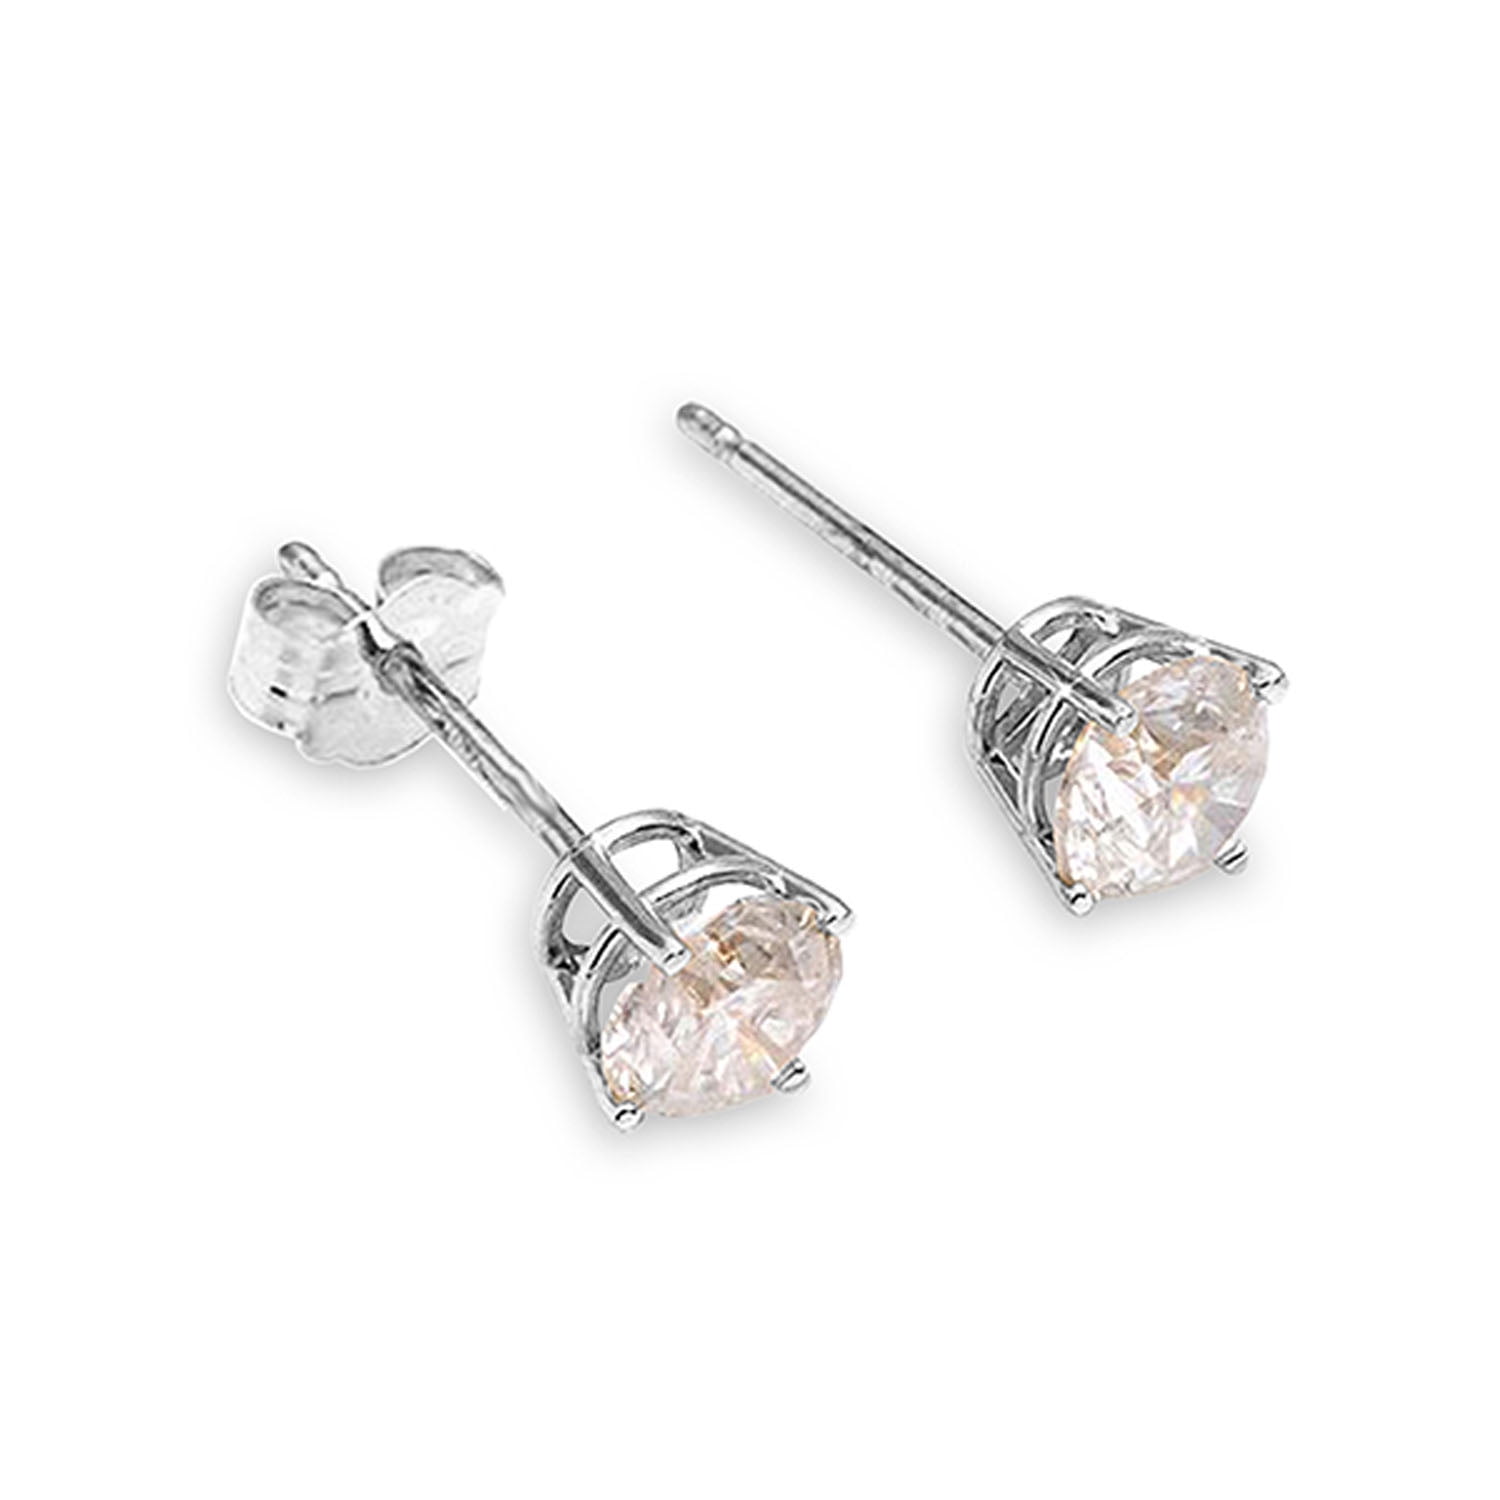 14K White Gold Solitaire Studs Earrings 0.20 Ct Natural Round Diamond Appraisal 